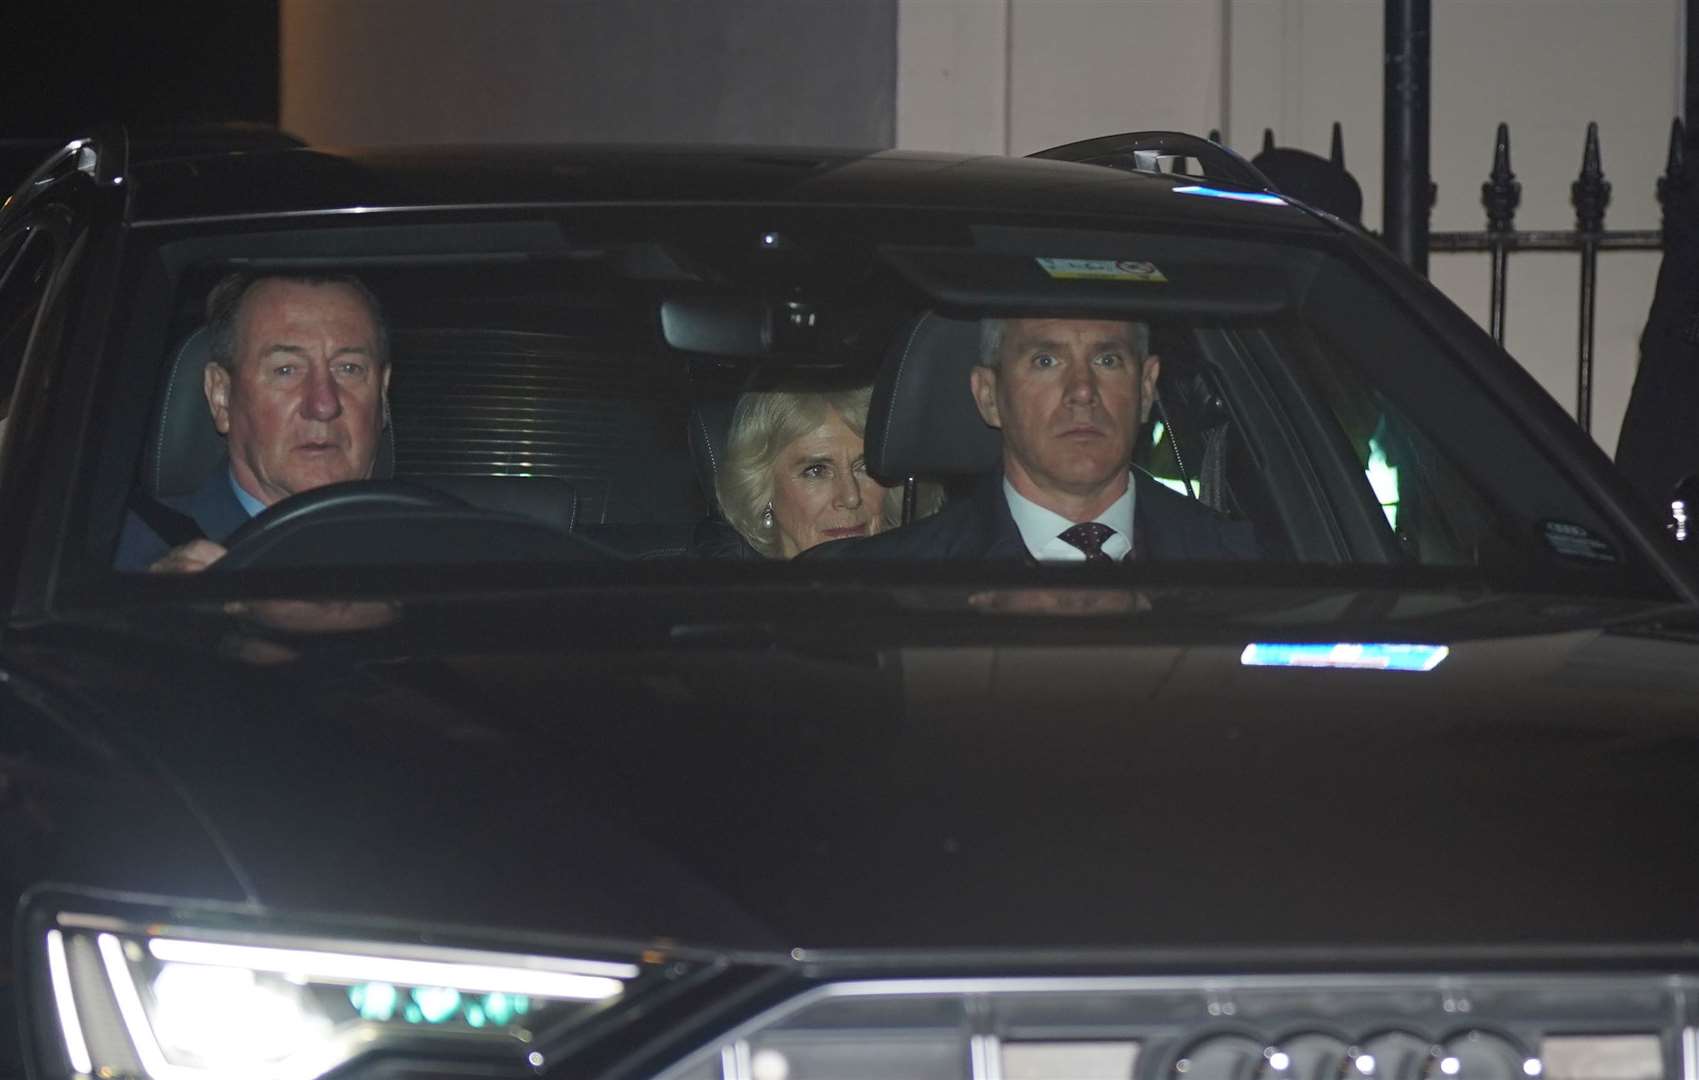 Camilla visited the King for around an hour and a half before leaving the hospital (Lucy North/PA)